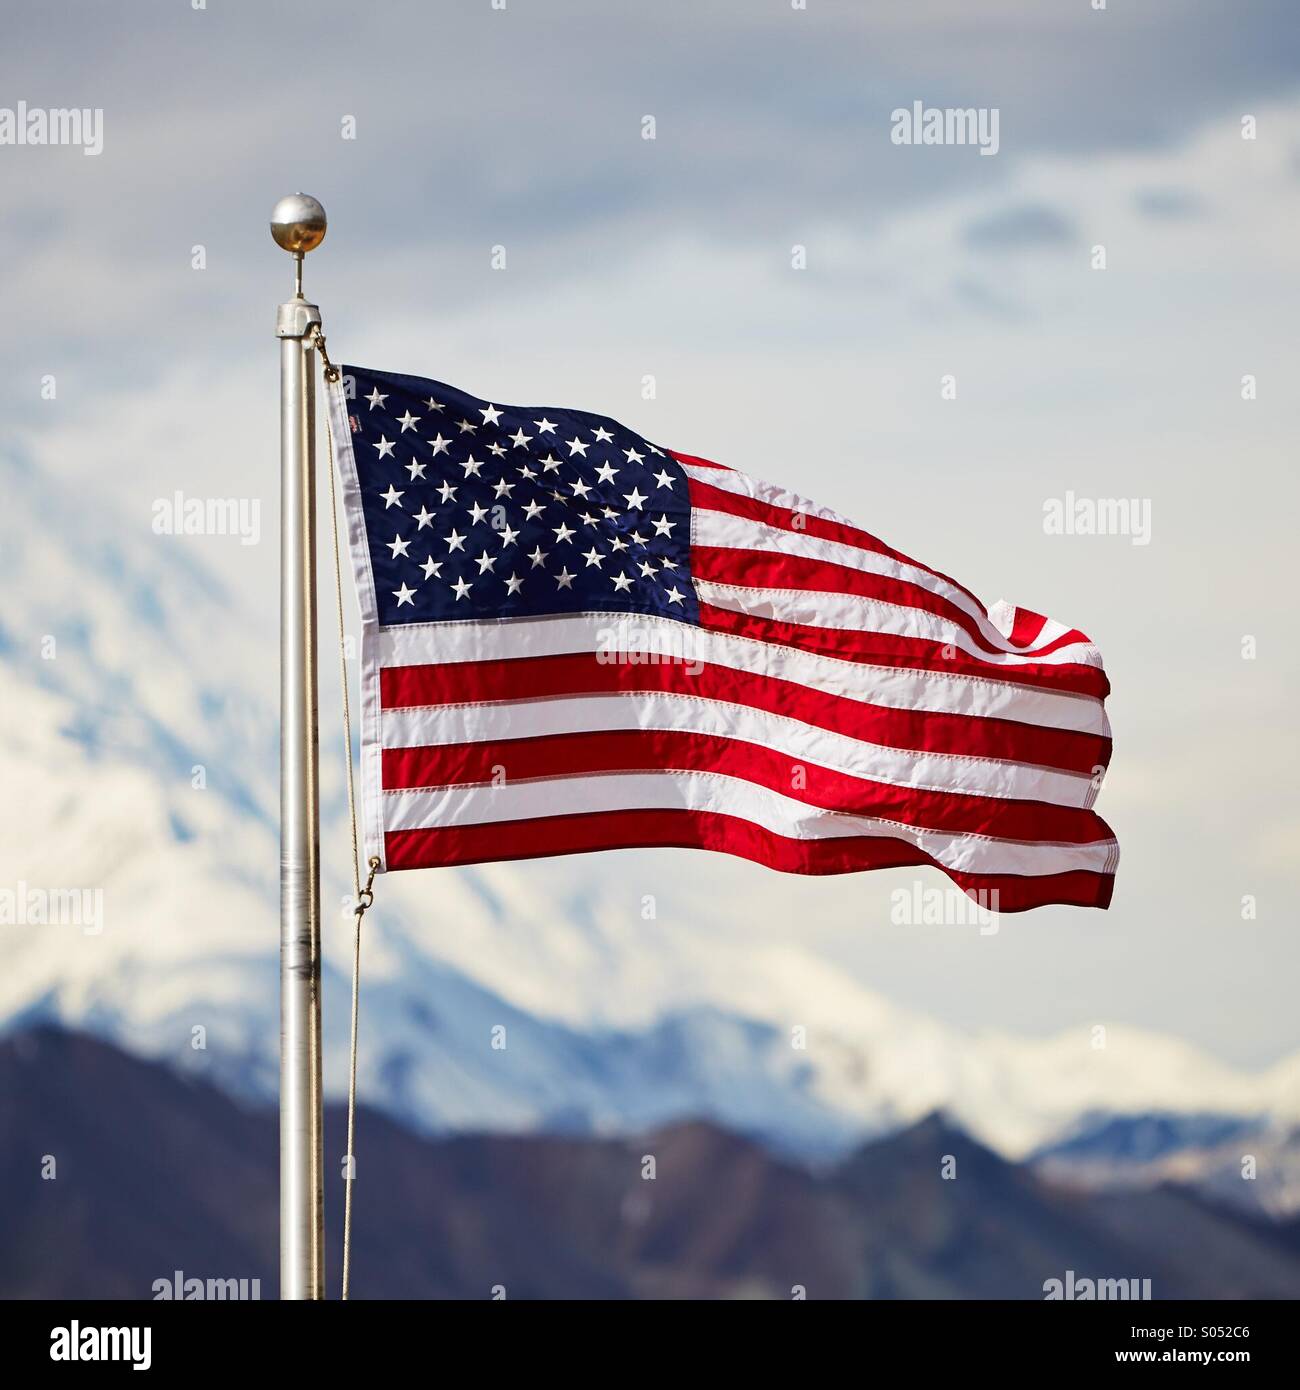 An American flag waves on a flag pole with snowy Alaskan Range mountains in the background. Stock Photo